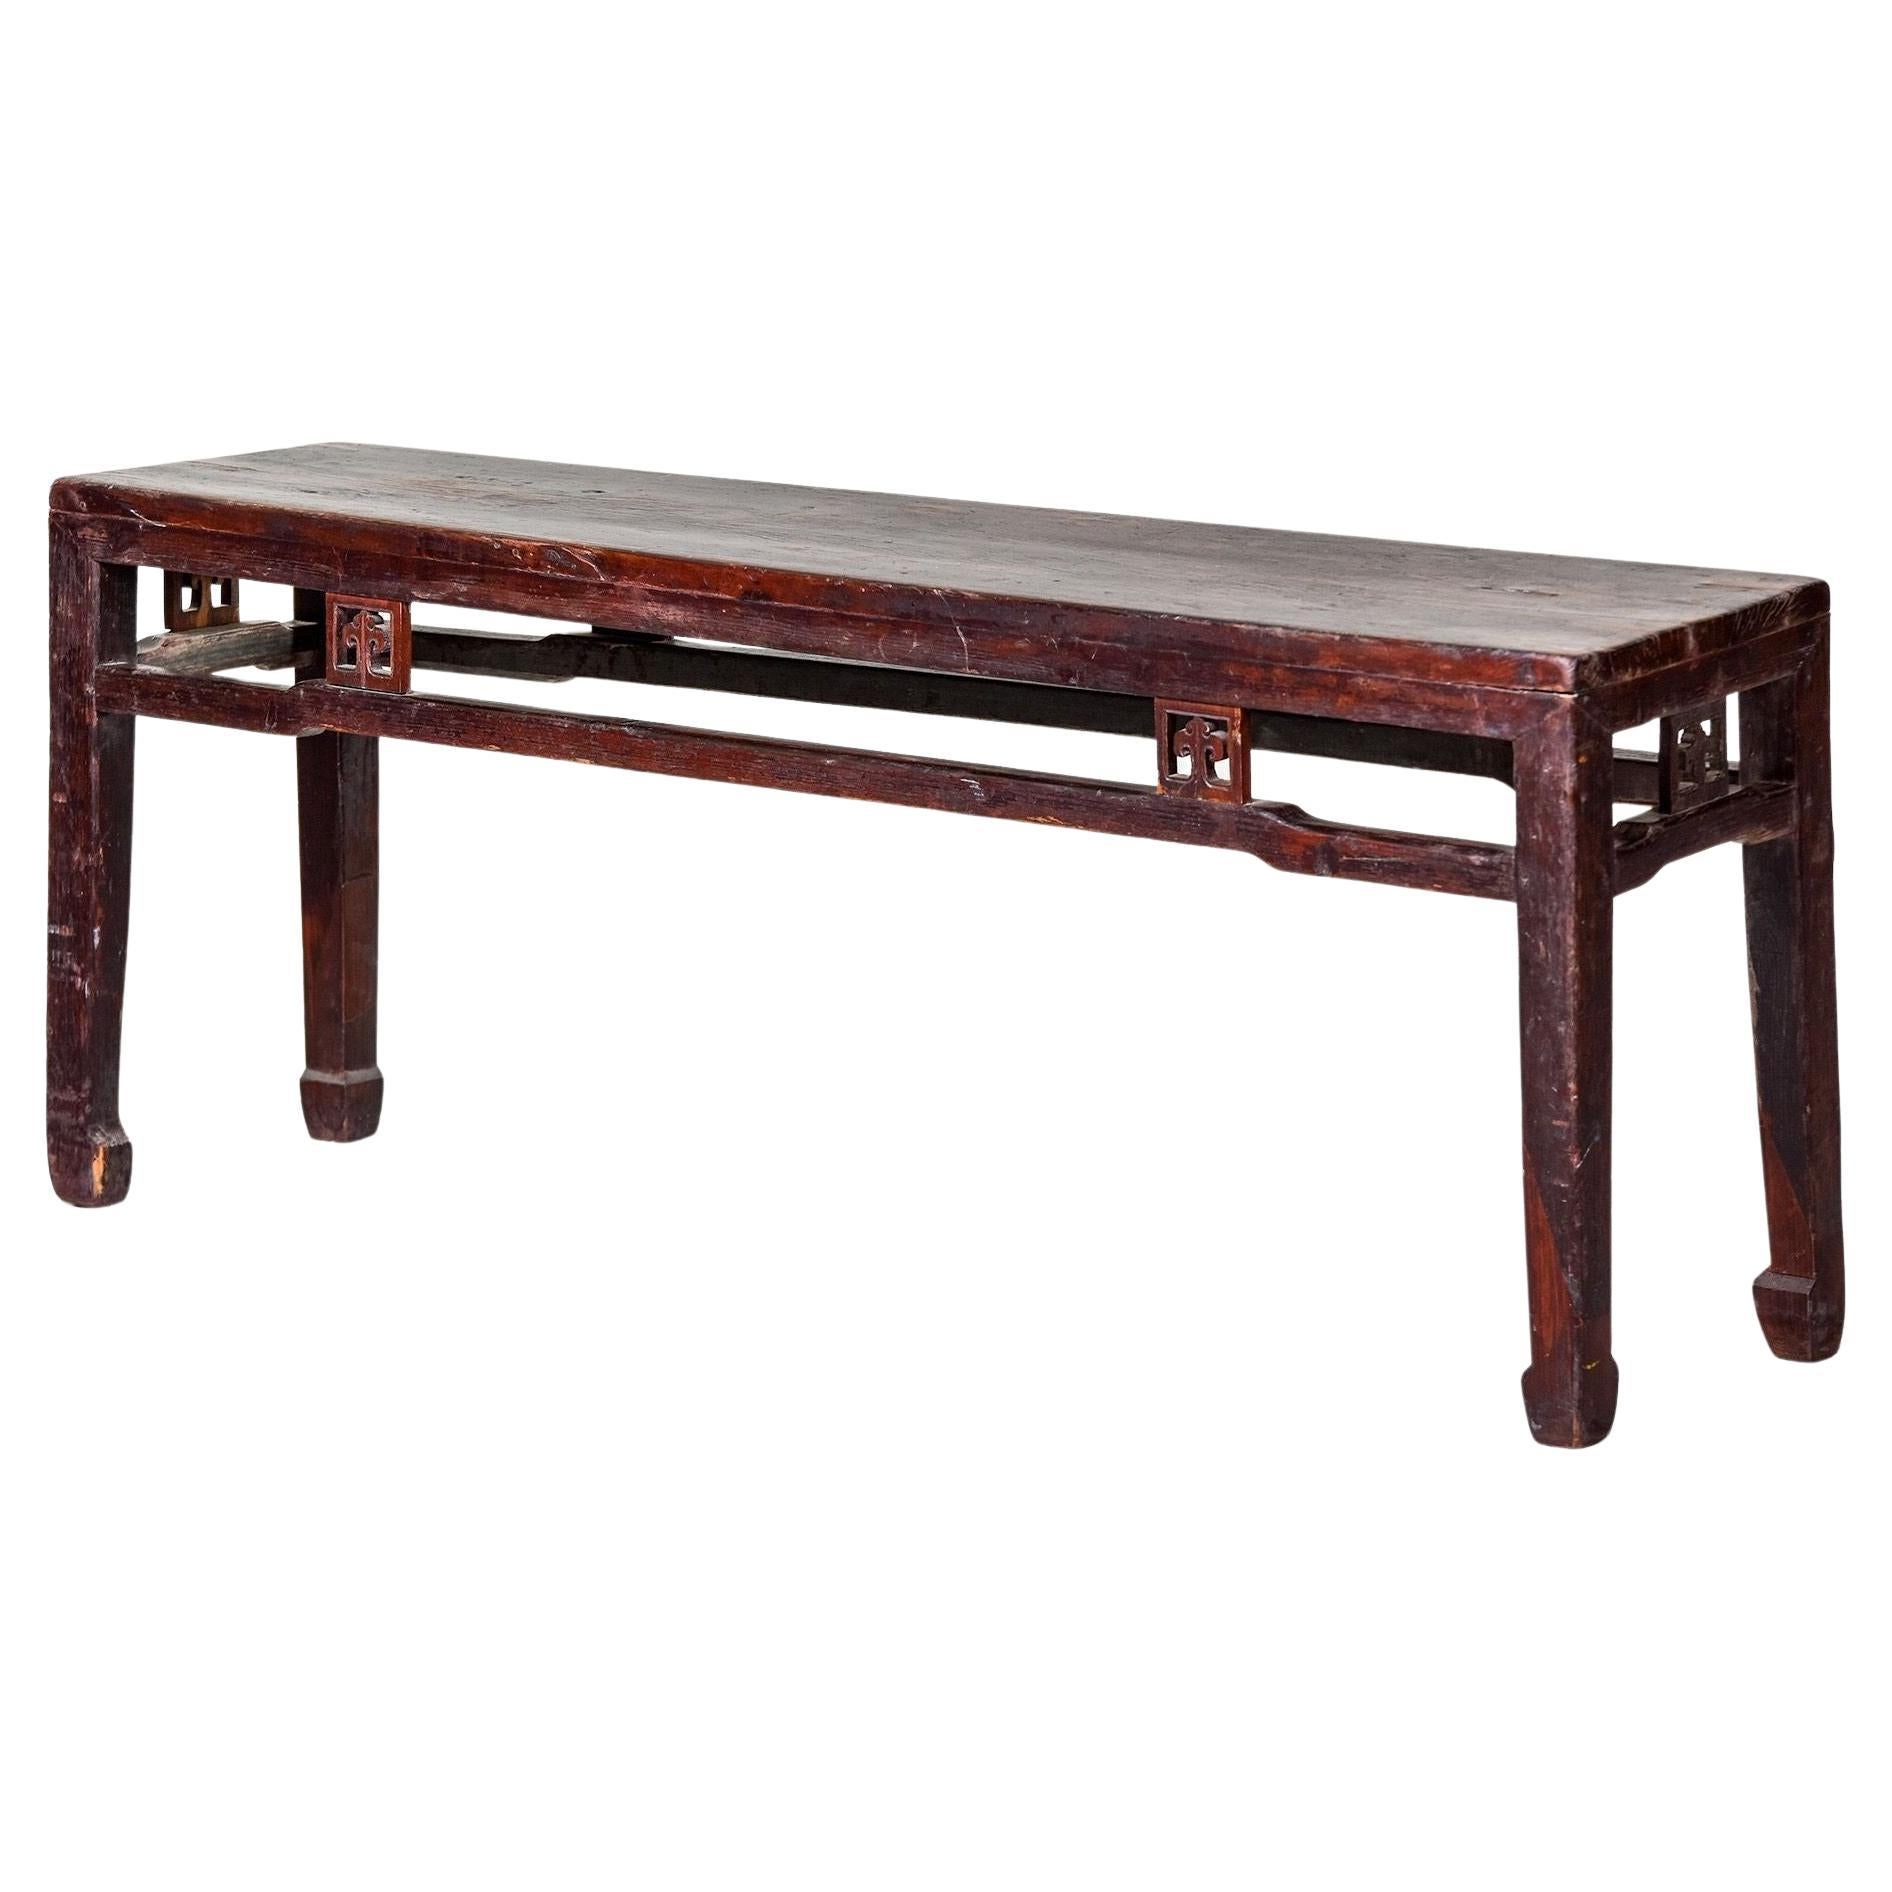 Early 20th C Extra Long Chinese Elm Wood Dong Yang Bench